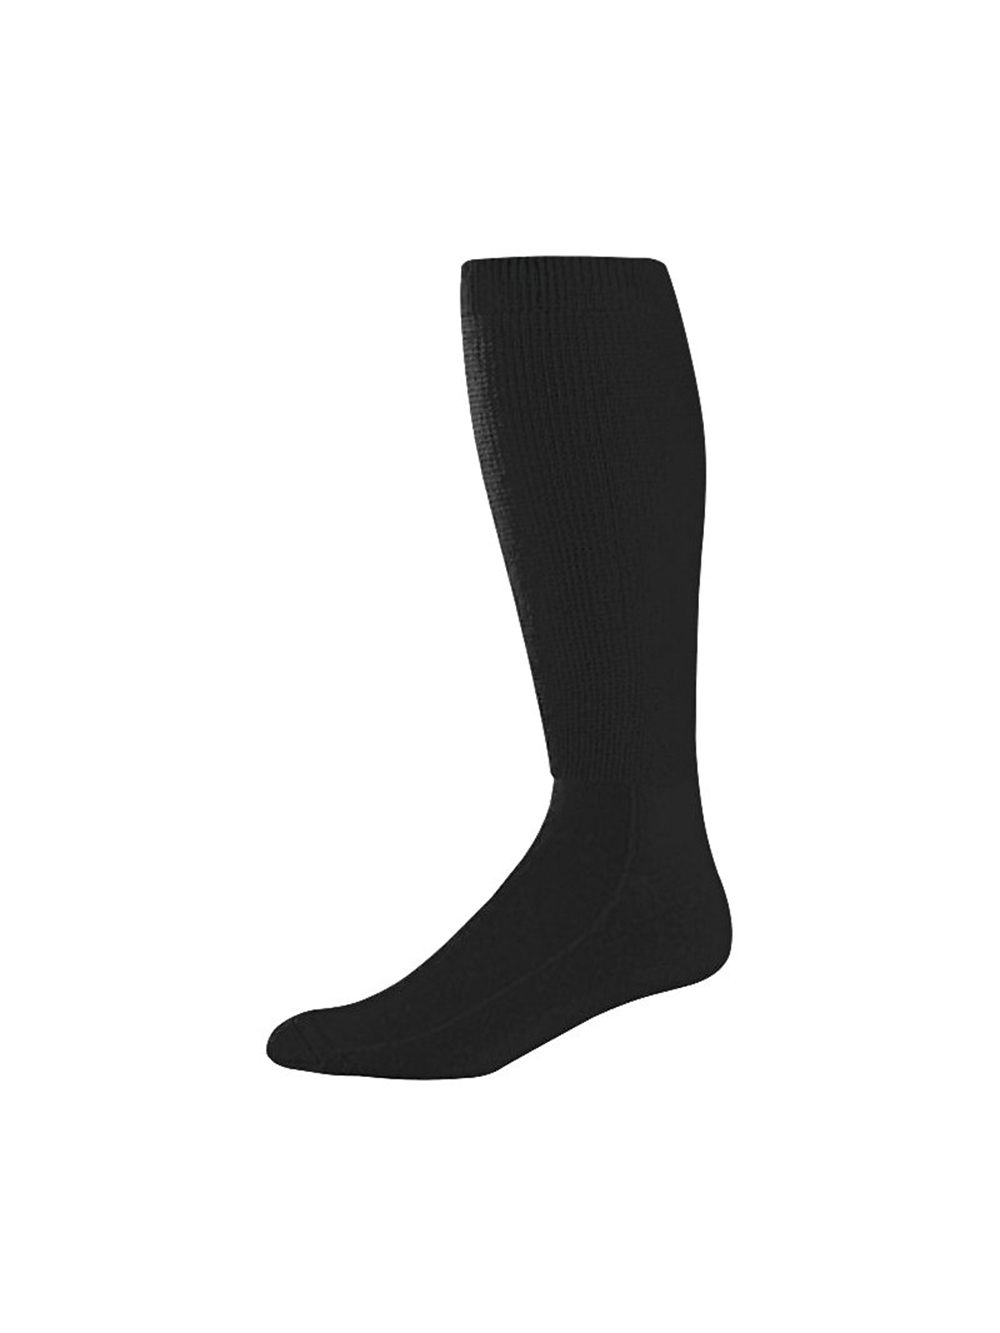 Augusta Athletic Socks | Midwest Volleyball Warehouse